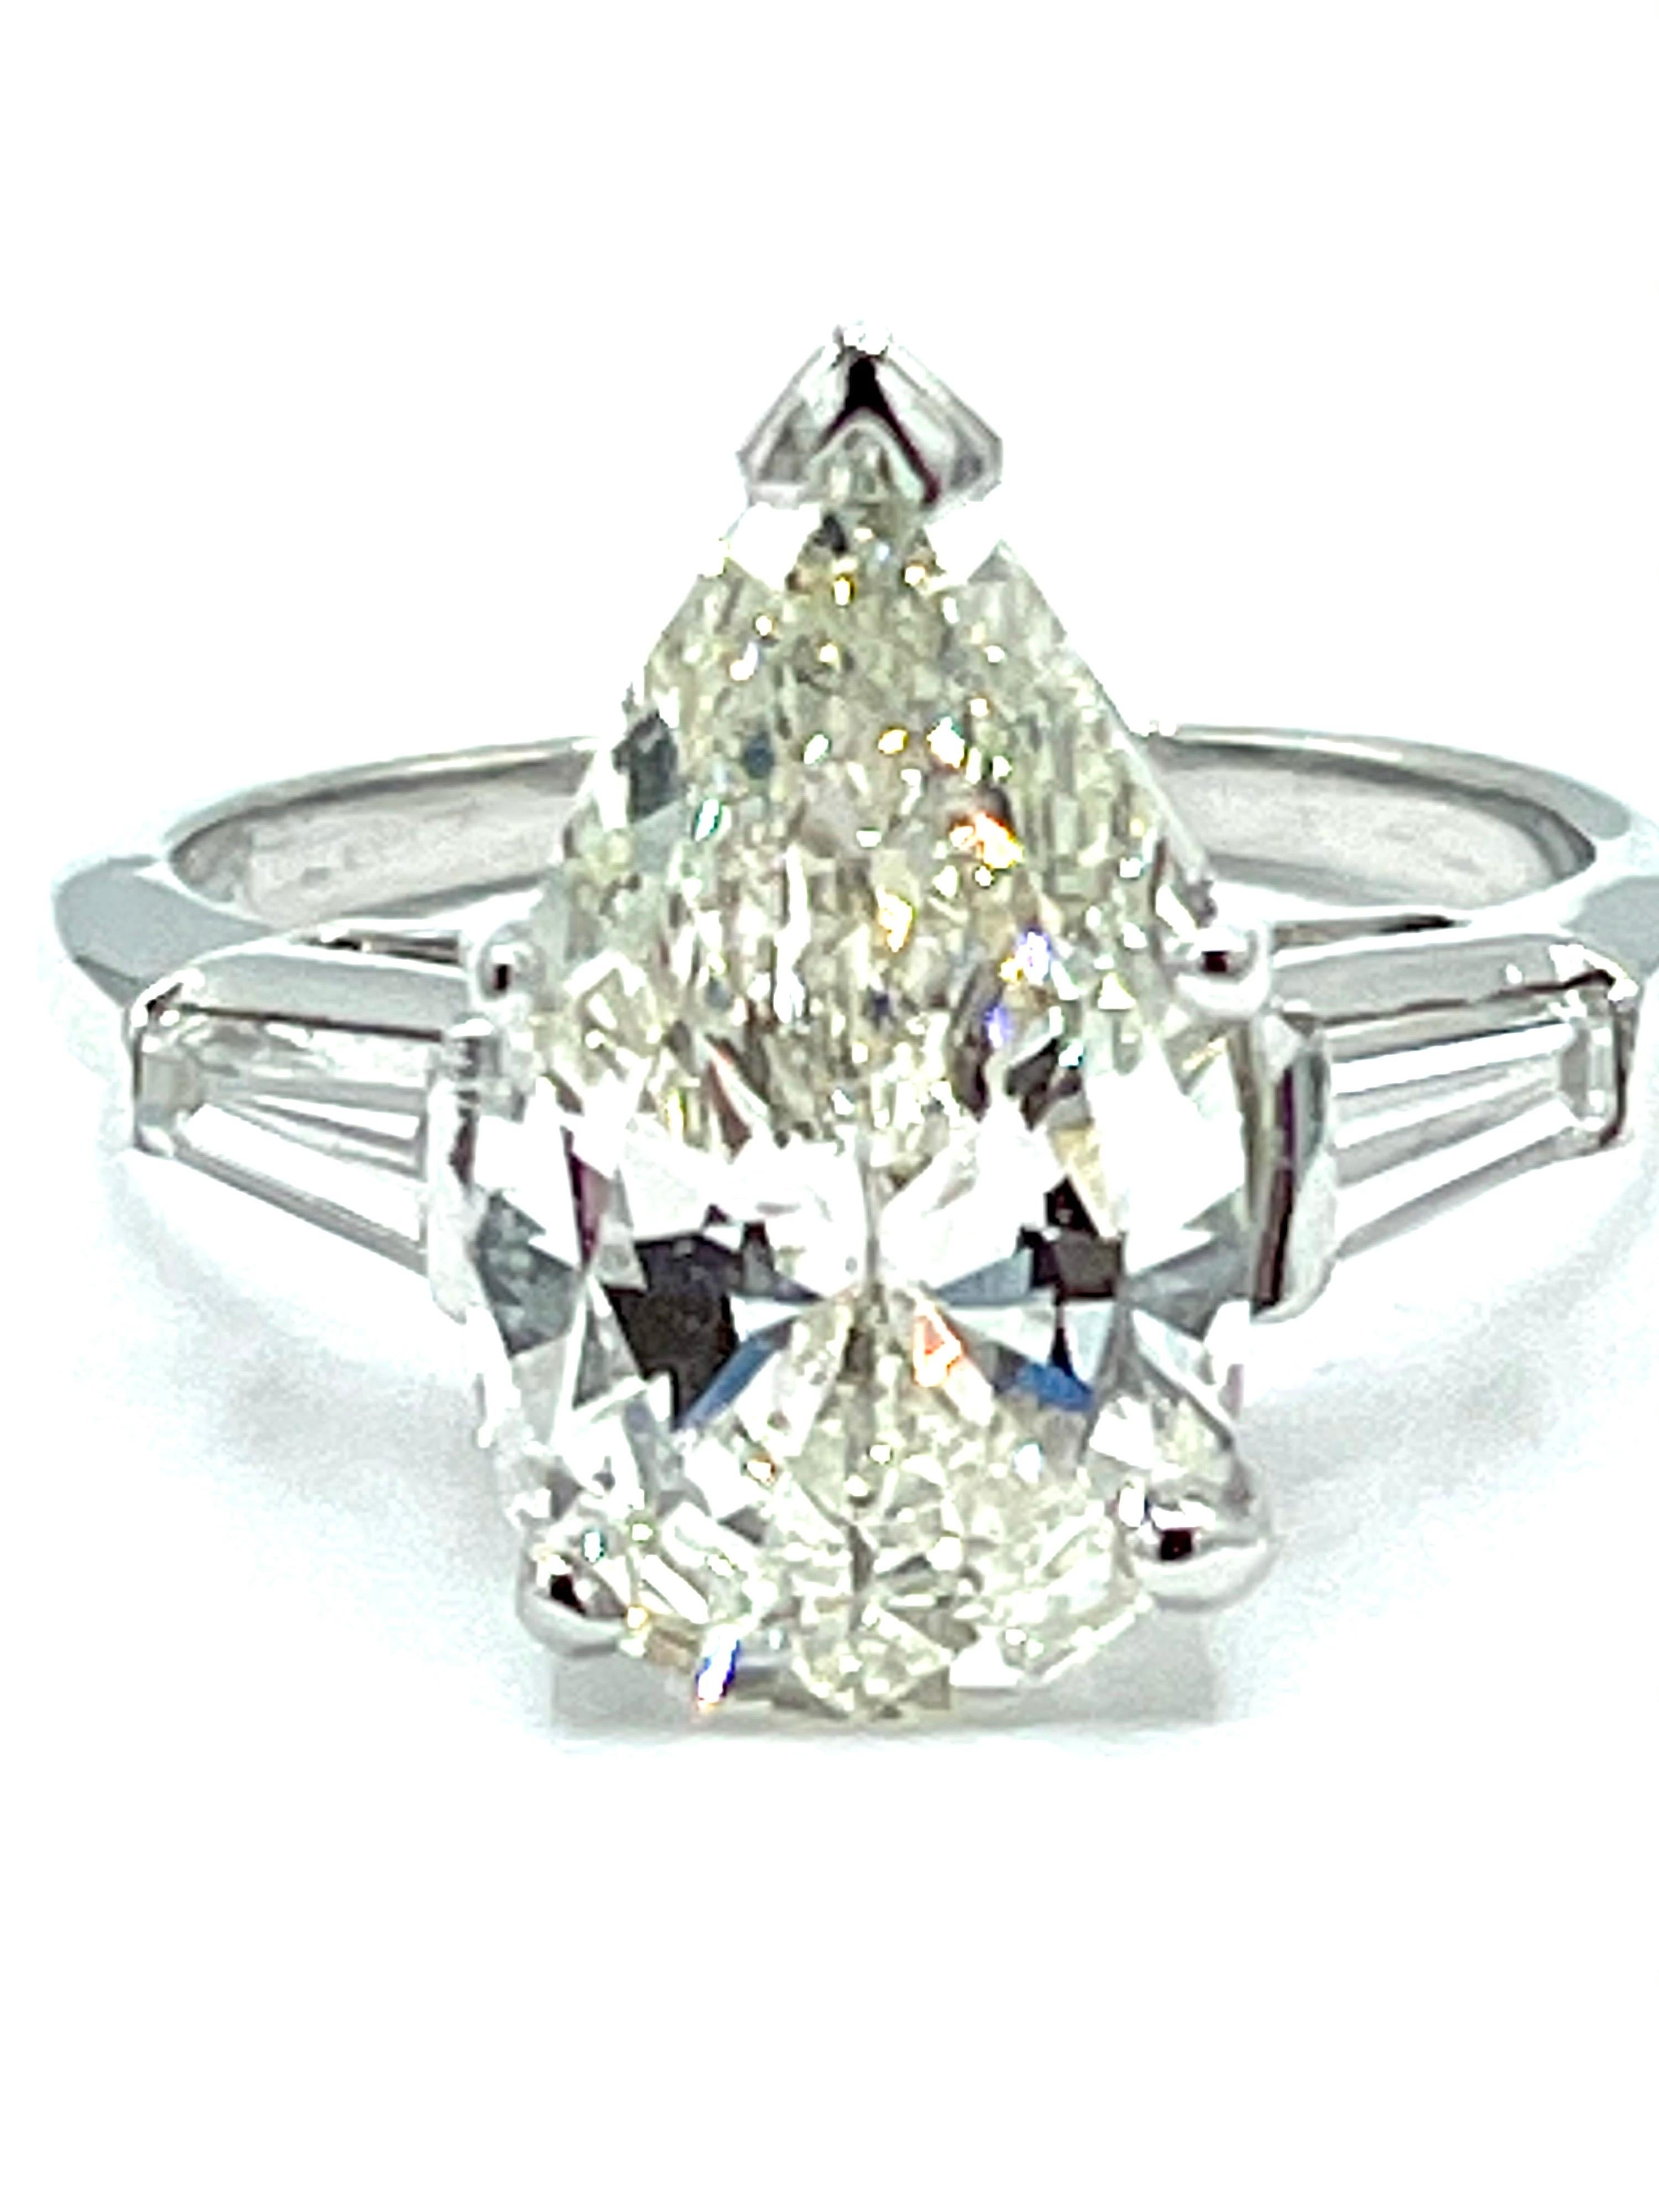 A gorgeous 3.24 carats pear shape brilliant Diamond engagement ring.  The Diamond is set in a five prong basket, with two tapered baguettes tapering down toward the shank of the ring.  The pear shape is graded by GIA as L color, I1 clarity, and has